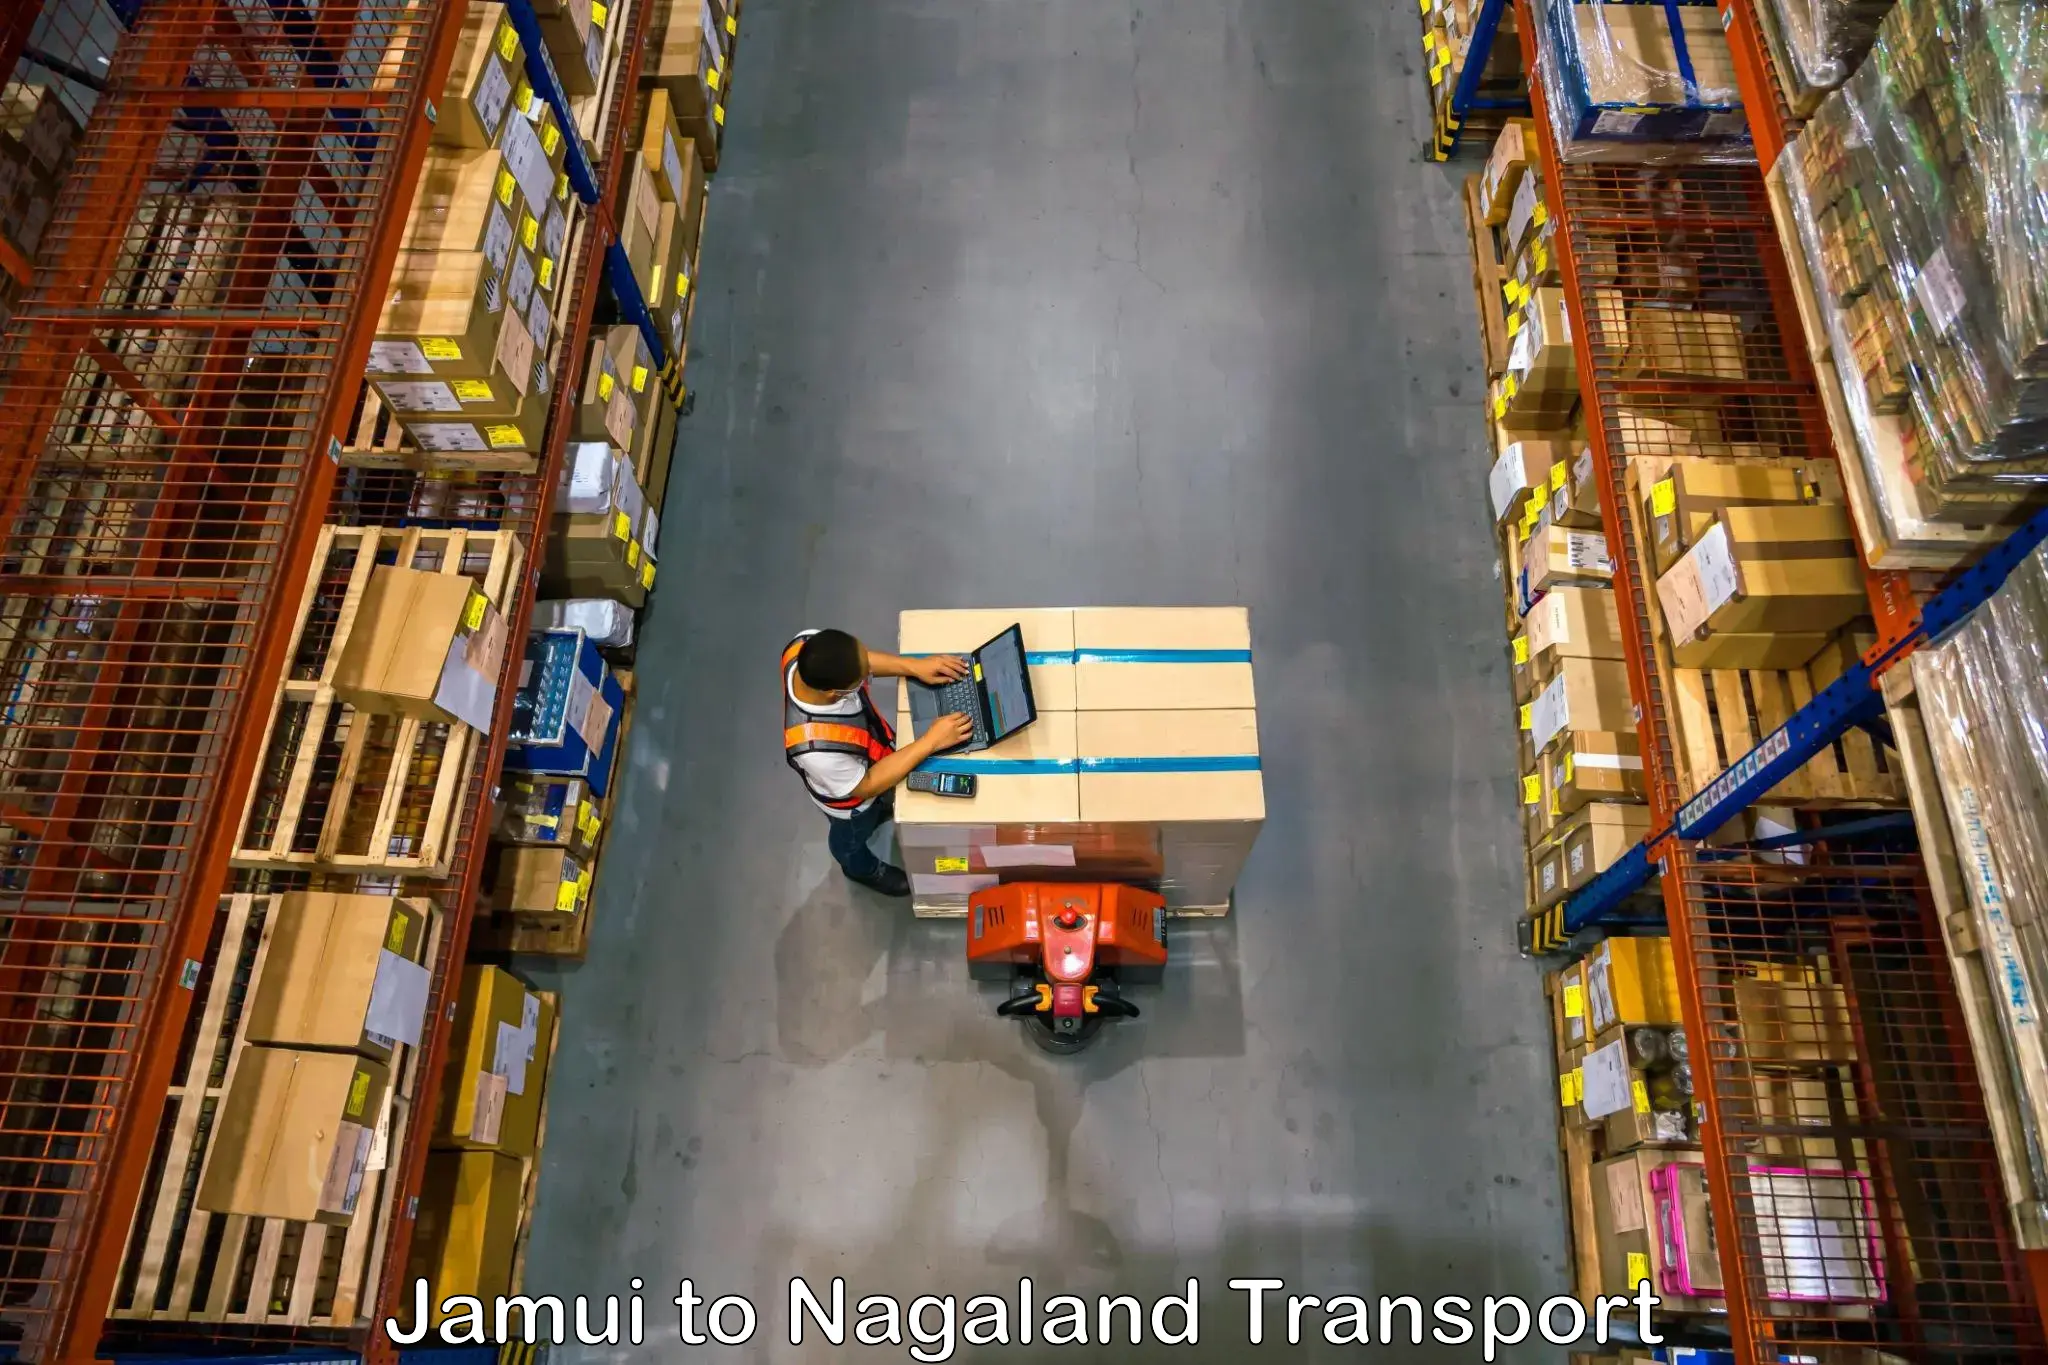 Commercial transport service Jamui to Nagaland